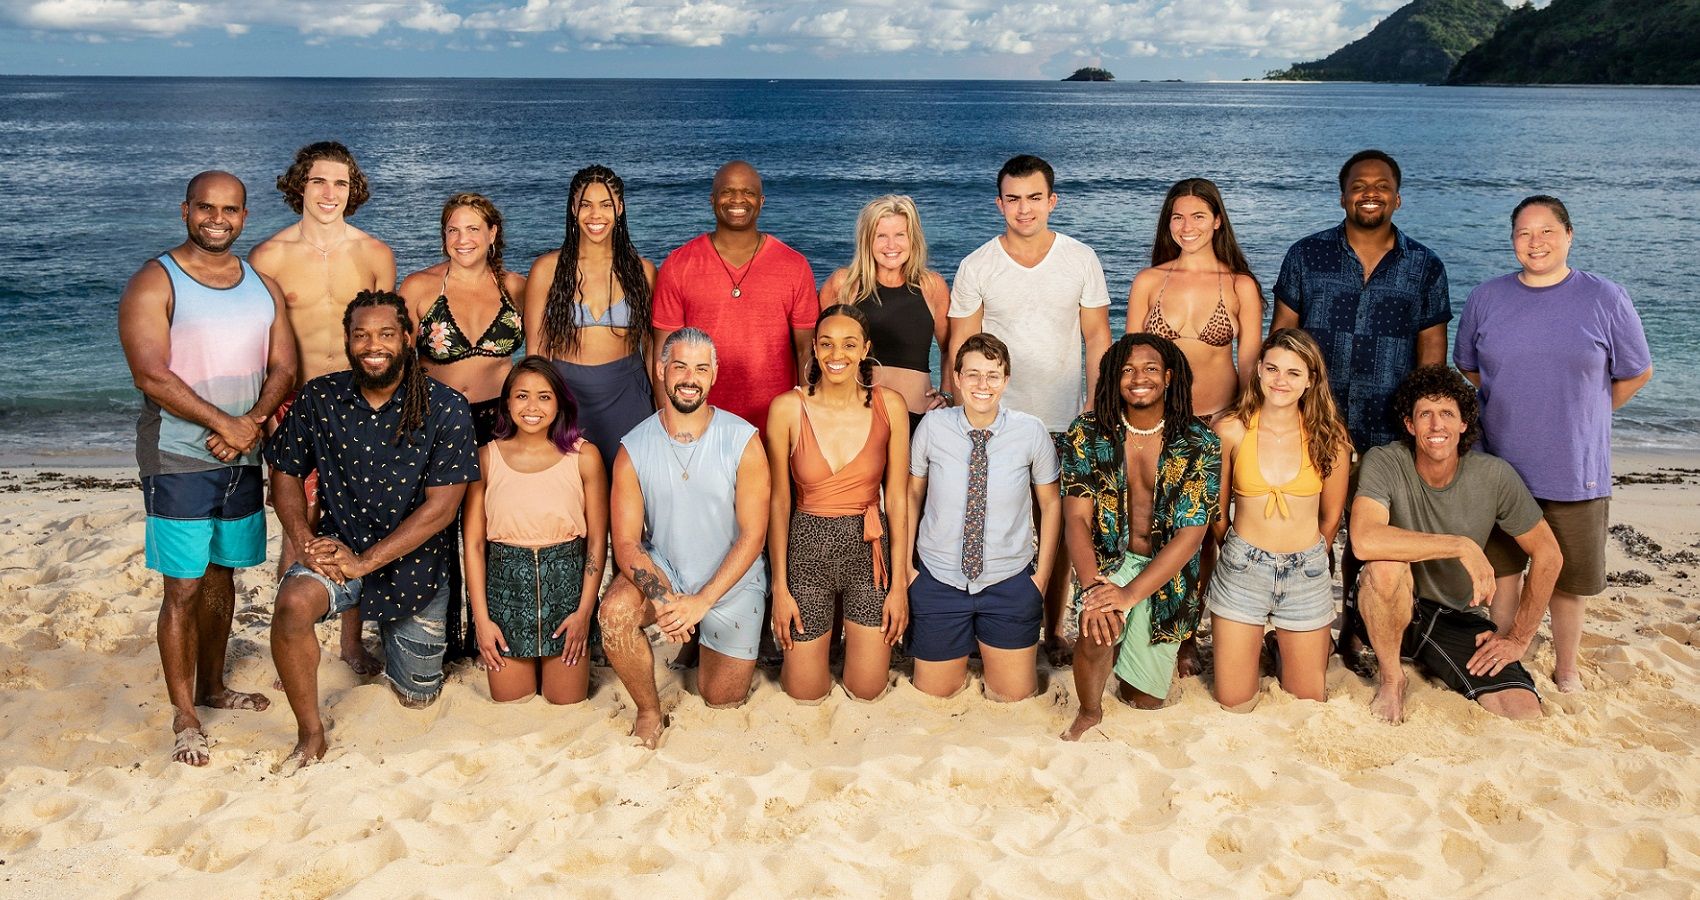 Survivor' Casting: How to Audition for the Reality Series